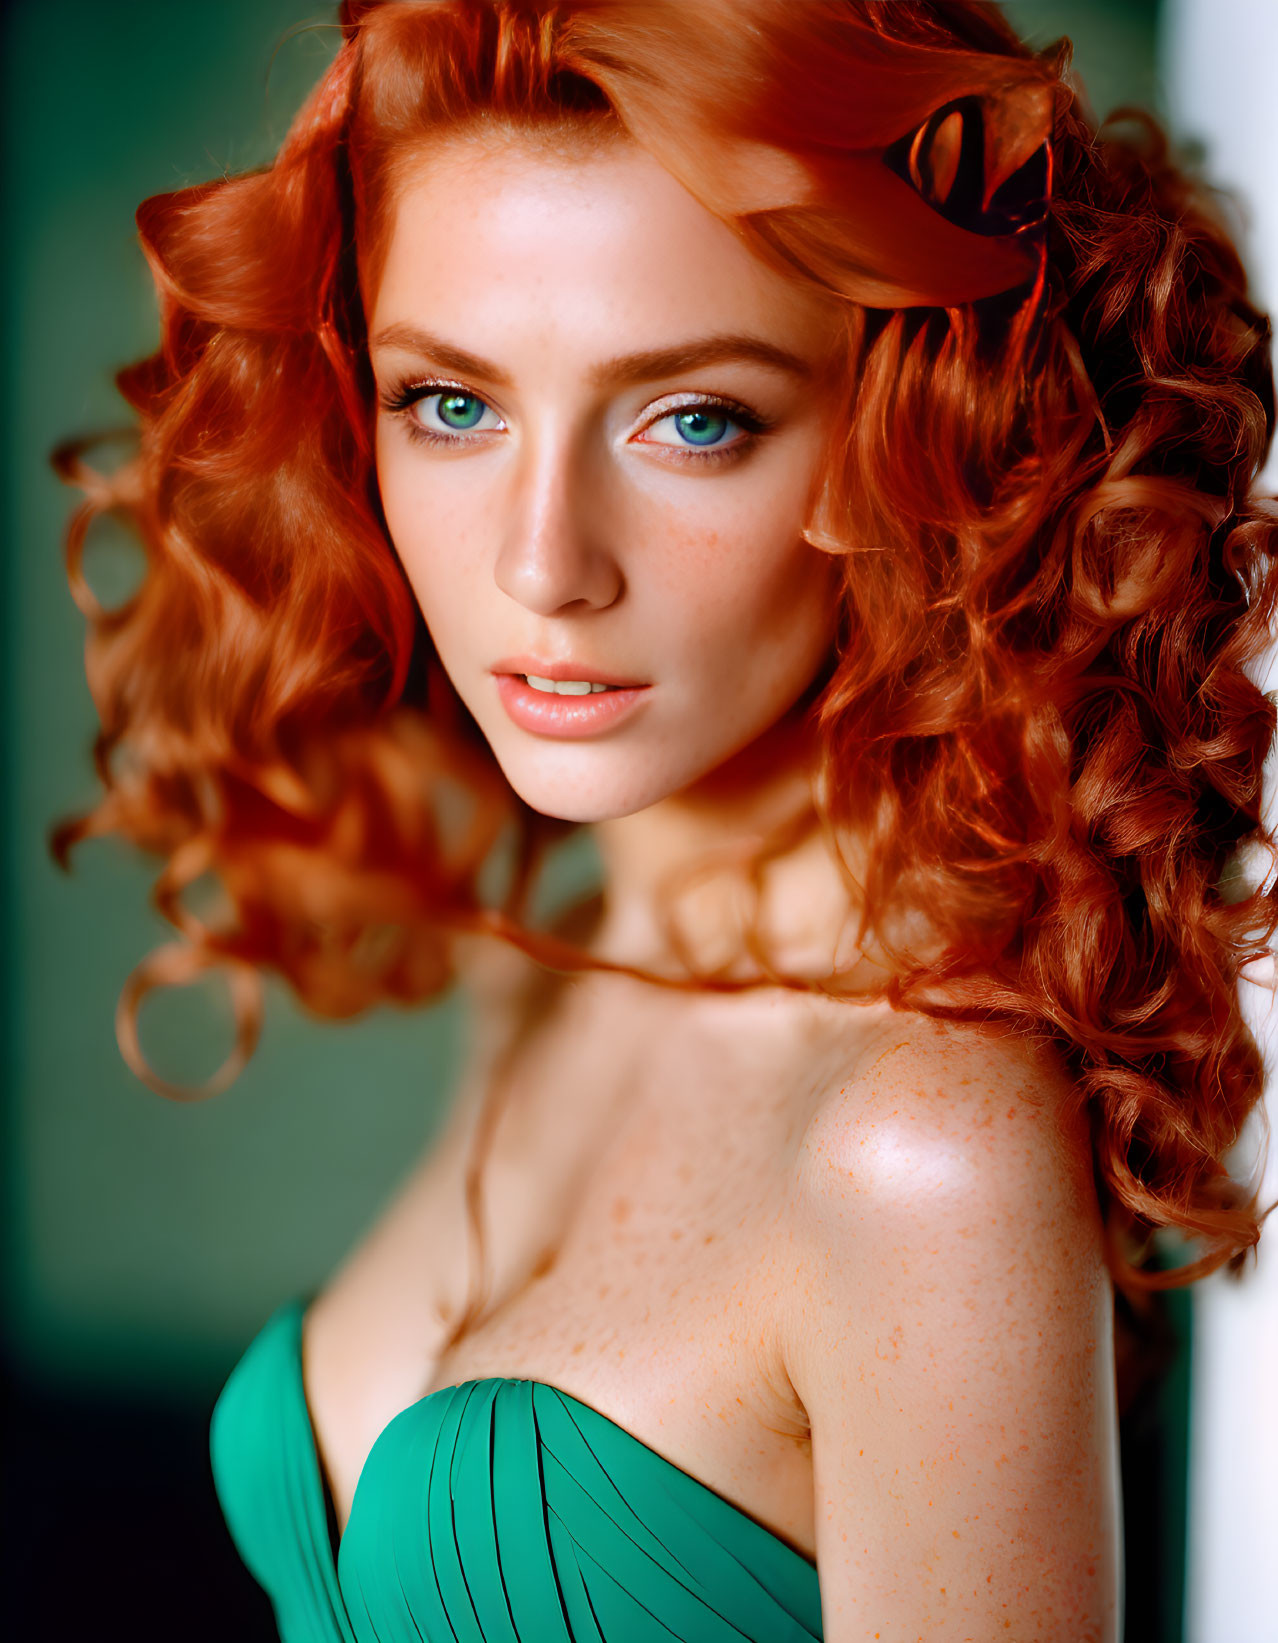 Curly red-haired woman in teal dress with blue eyes and red hair accessory.